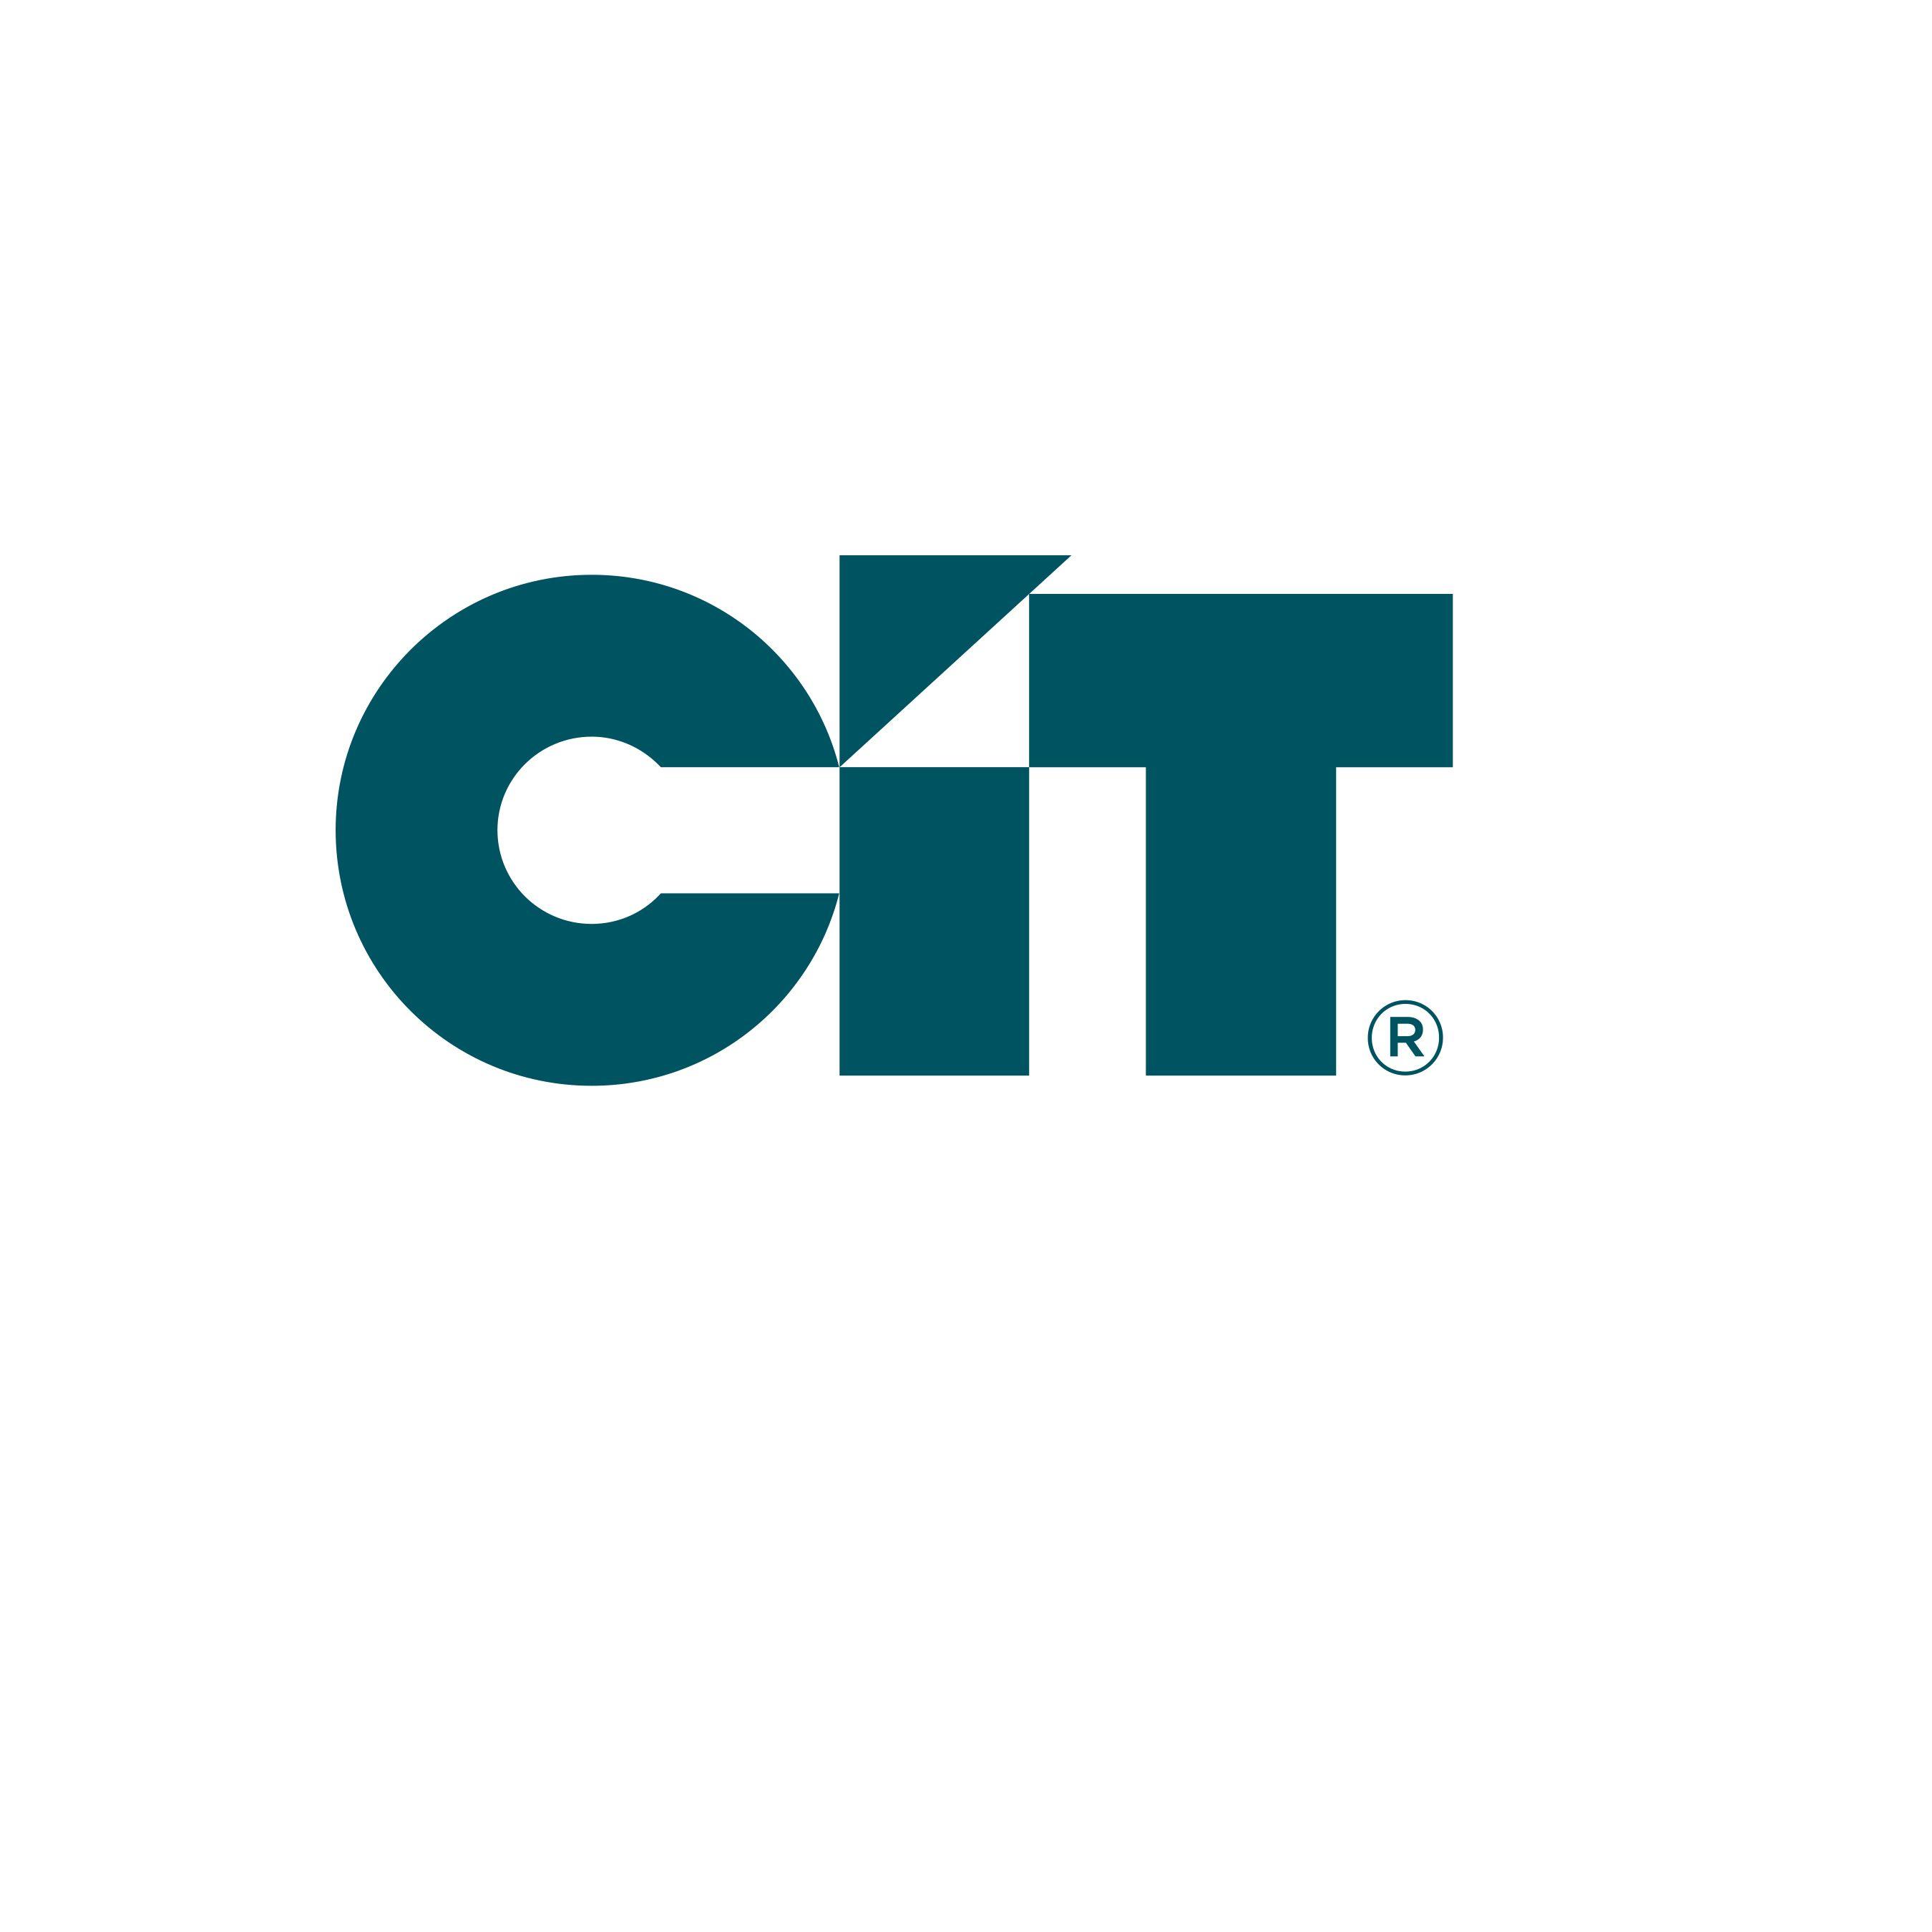 CIT Logo - CIT Reveals New Brand Identity Focused on Empowering Customers and ...